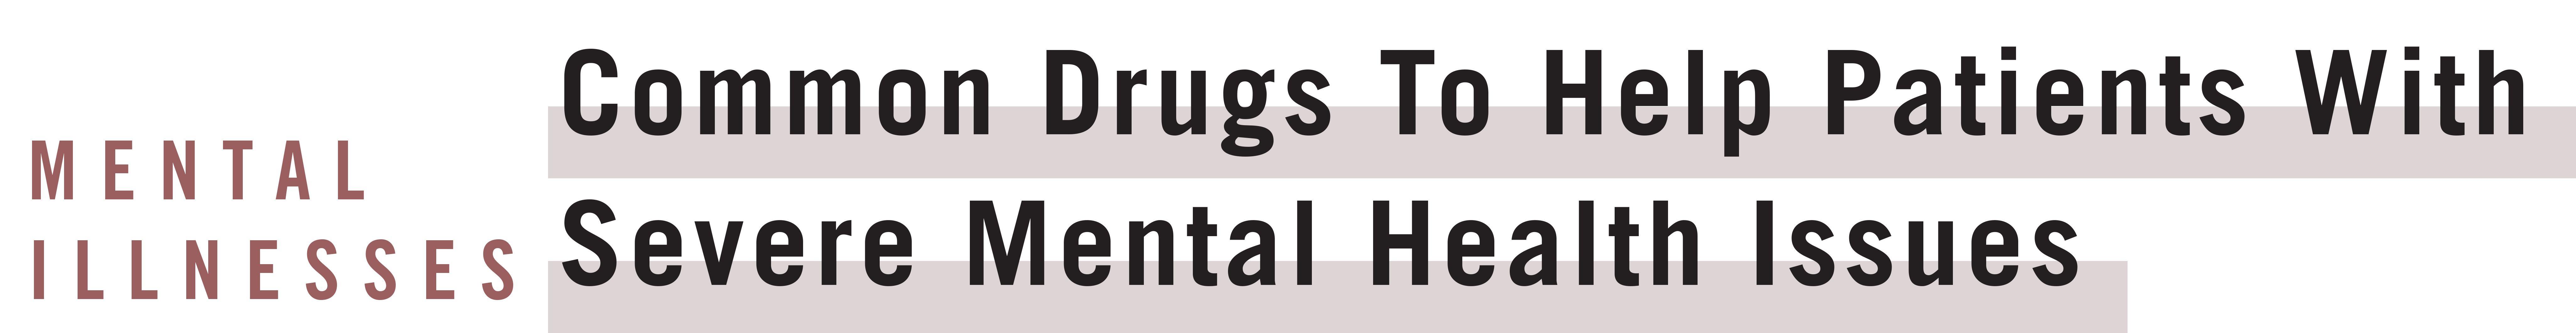 Mental Health: Common Drugs might help